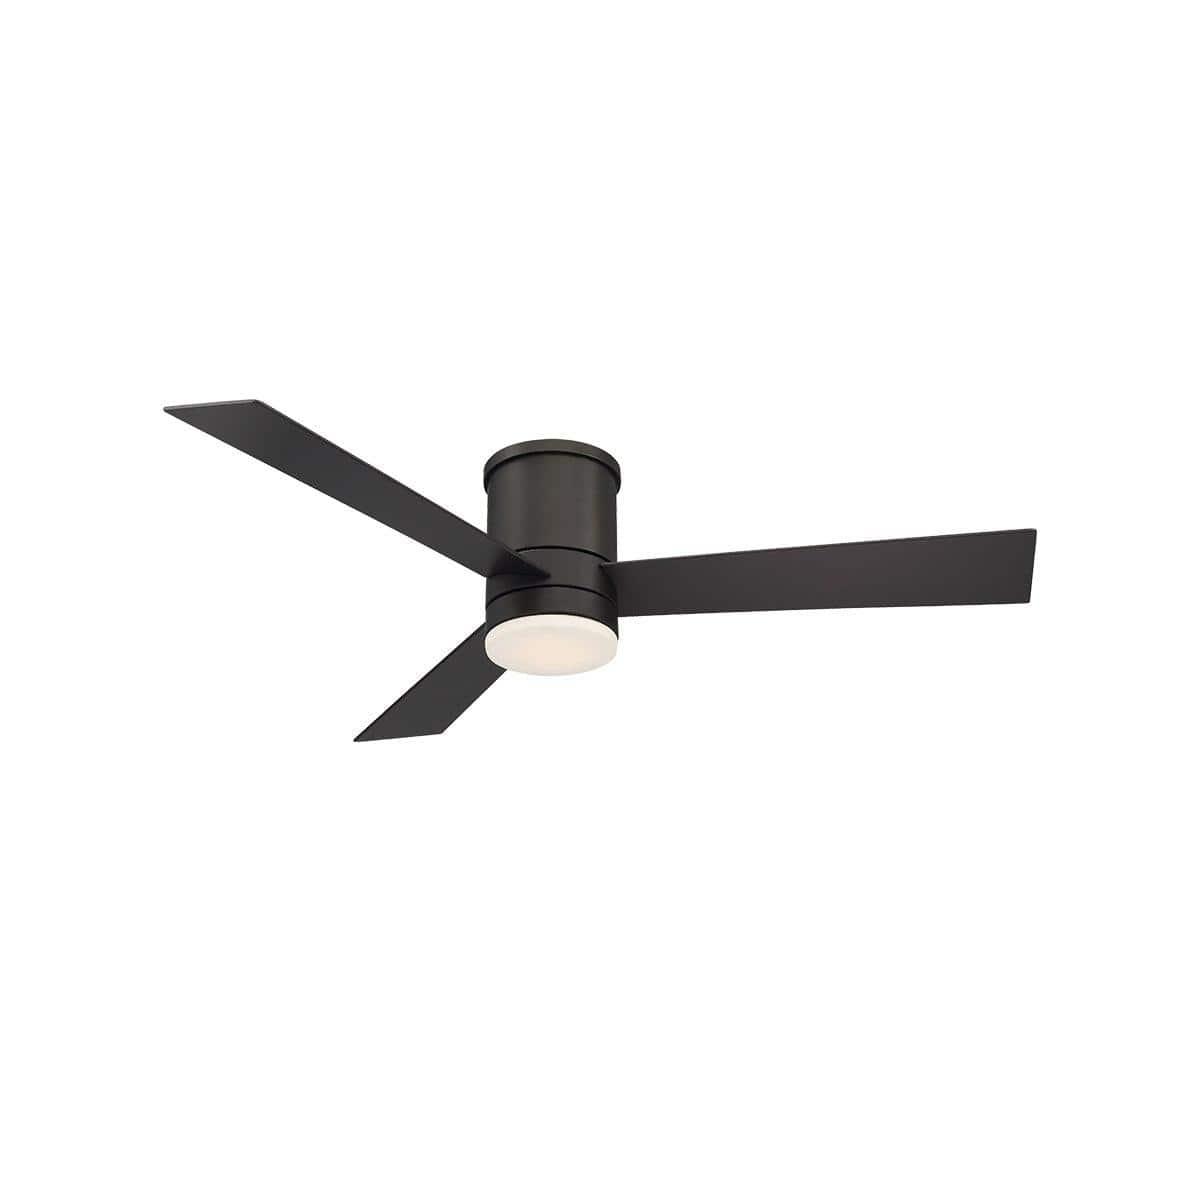 Modern Forms - Axis Flush Ceiling Fan - FH-W1803-52L-35-MB | Montreal Lighting & Hardware